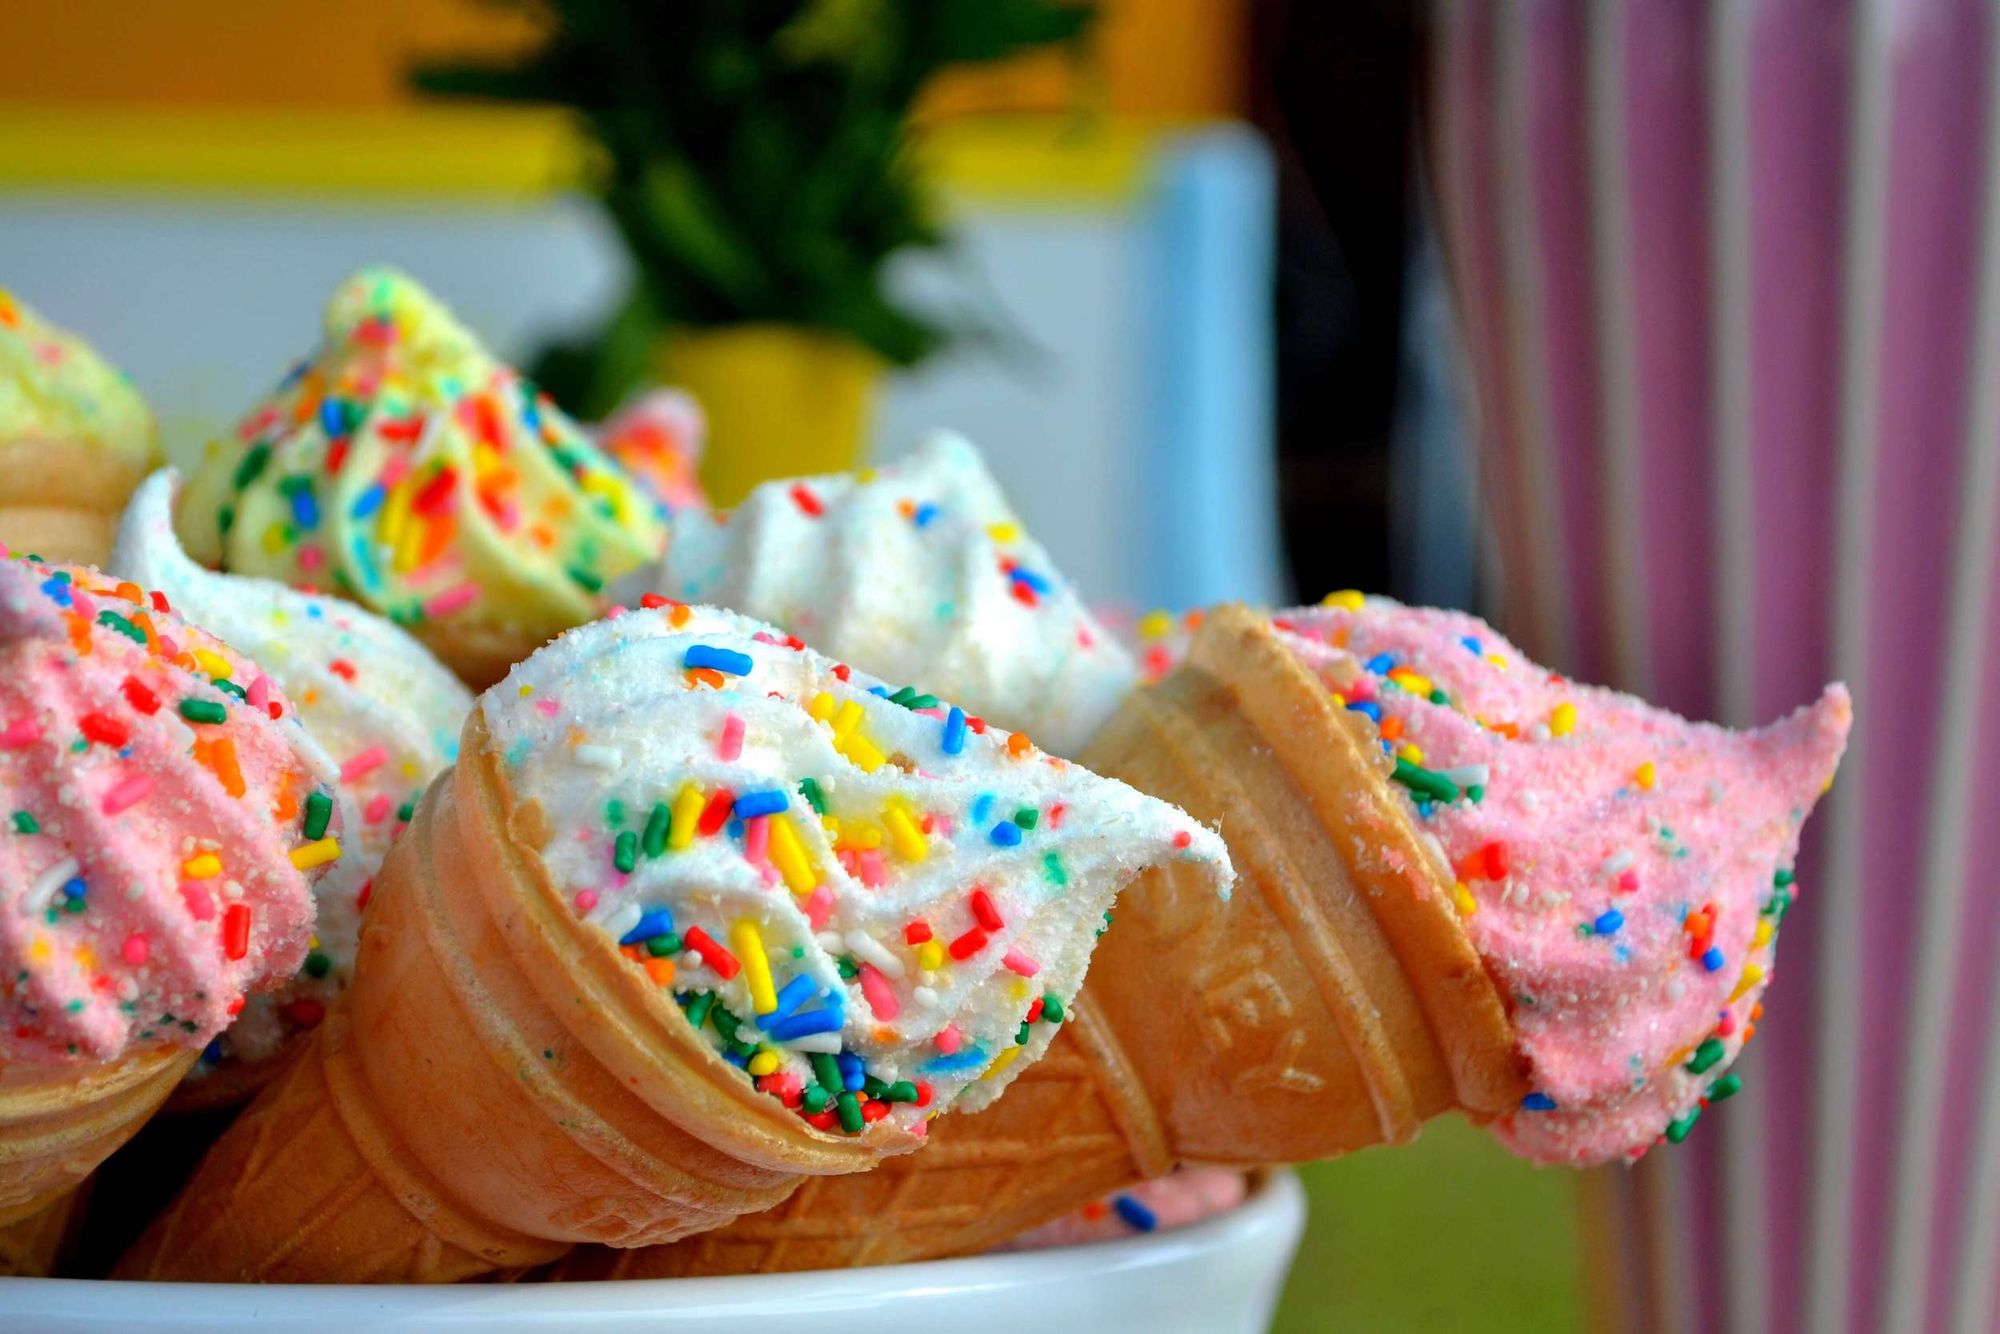 Various brightly coloured ice creams in wafer cones, topped with colourful sprinkles.